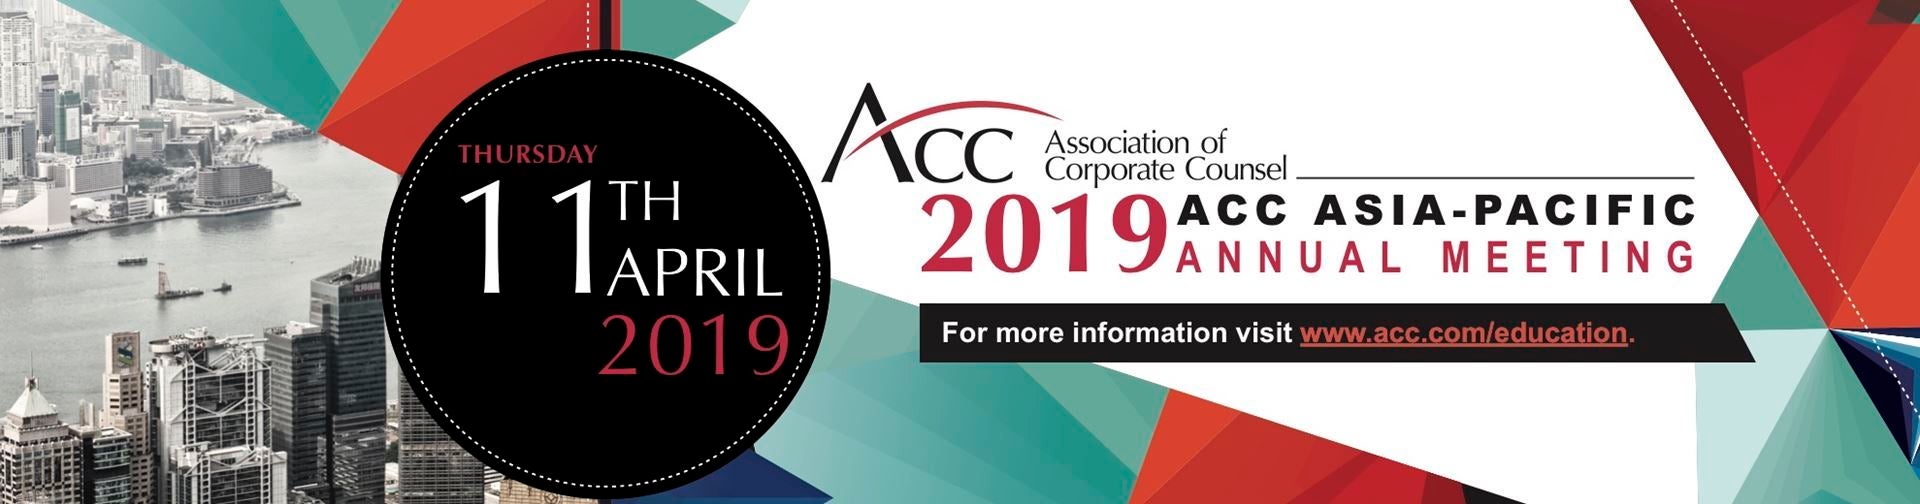 ACC Asiapacific 2019 Annual Meeting Association of Corporate Counsel